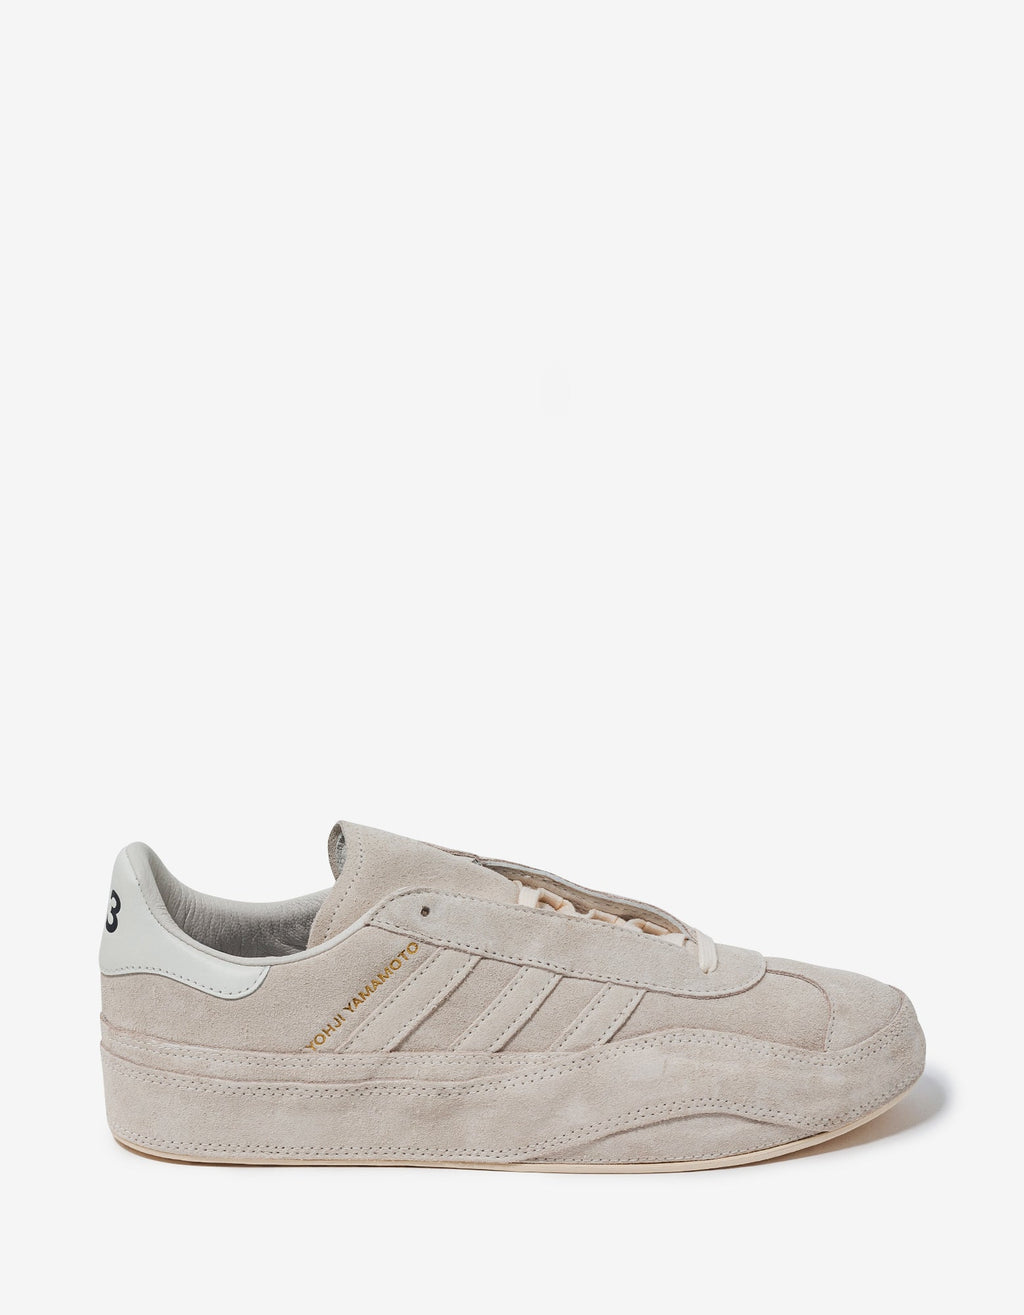 Y-3 Cream Gazelle Suede Leather Trainers